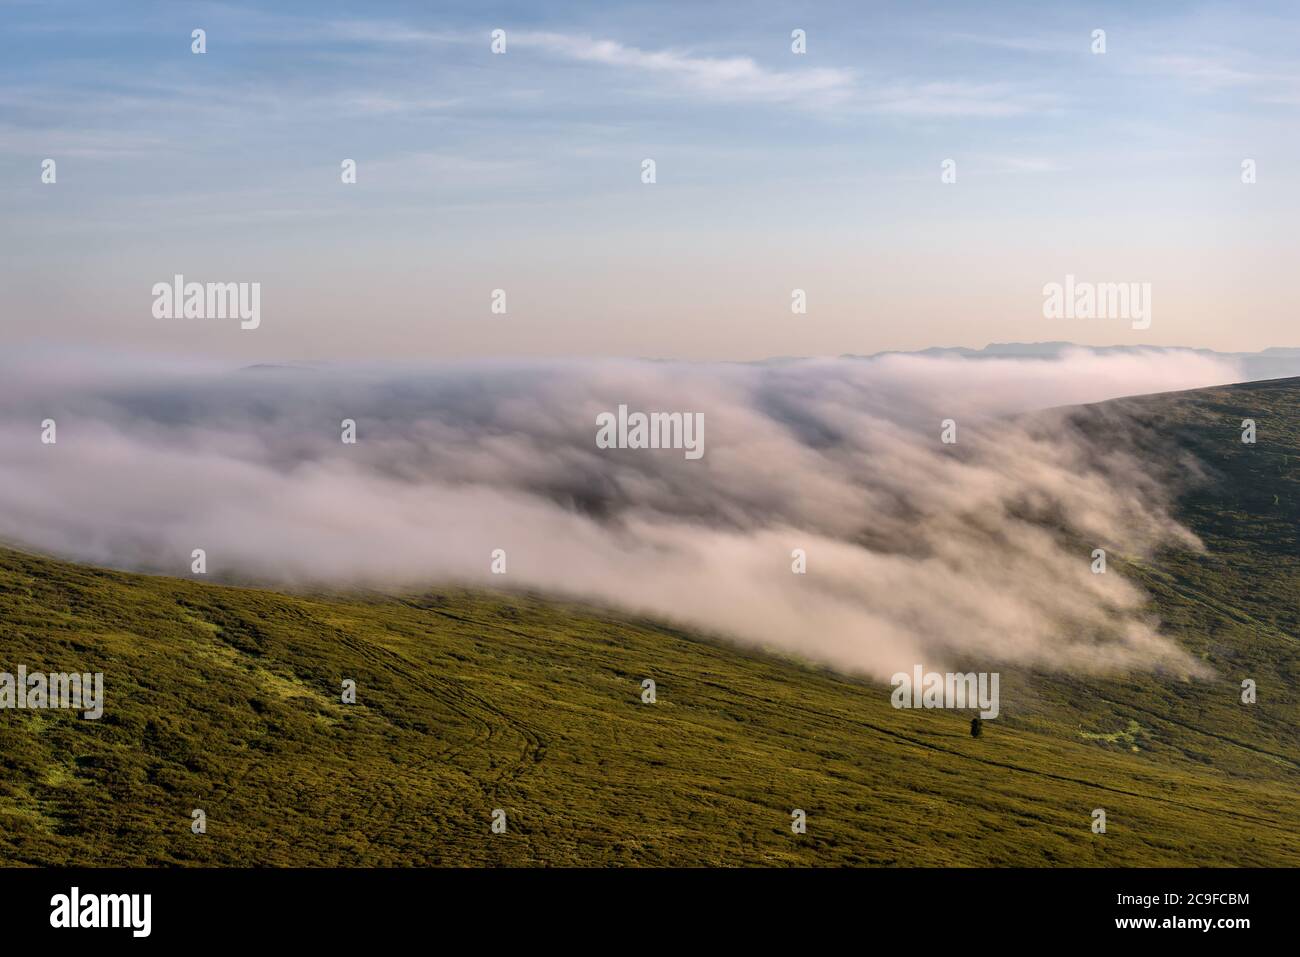 Amazing view with a beautiful white fluffy fog descending from the top of the mountain and cedar among thickets of dwarf birch on the slope of the mou Stock Photo